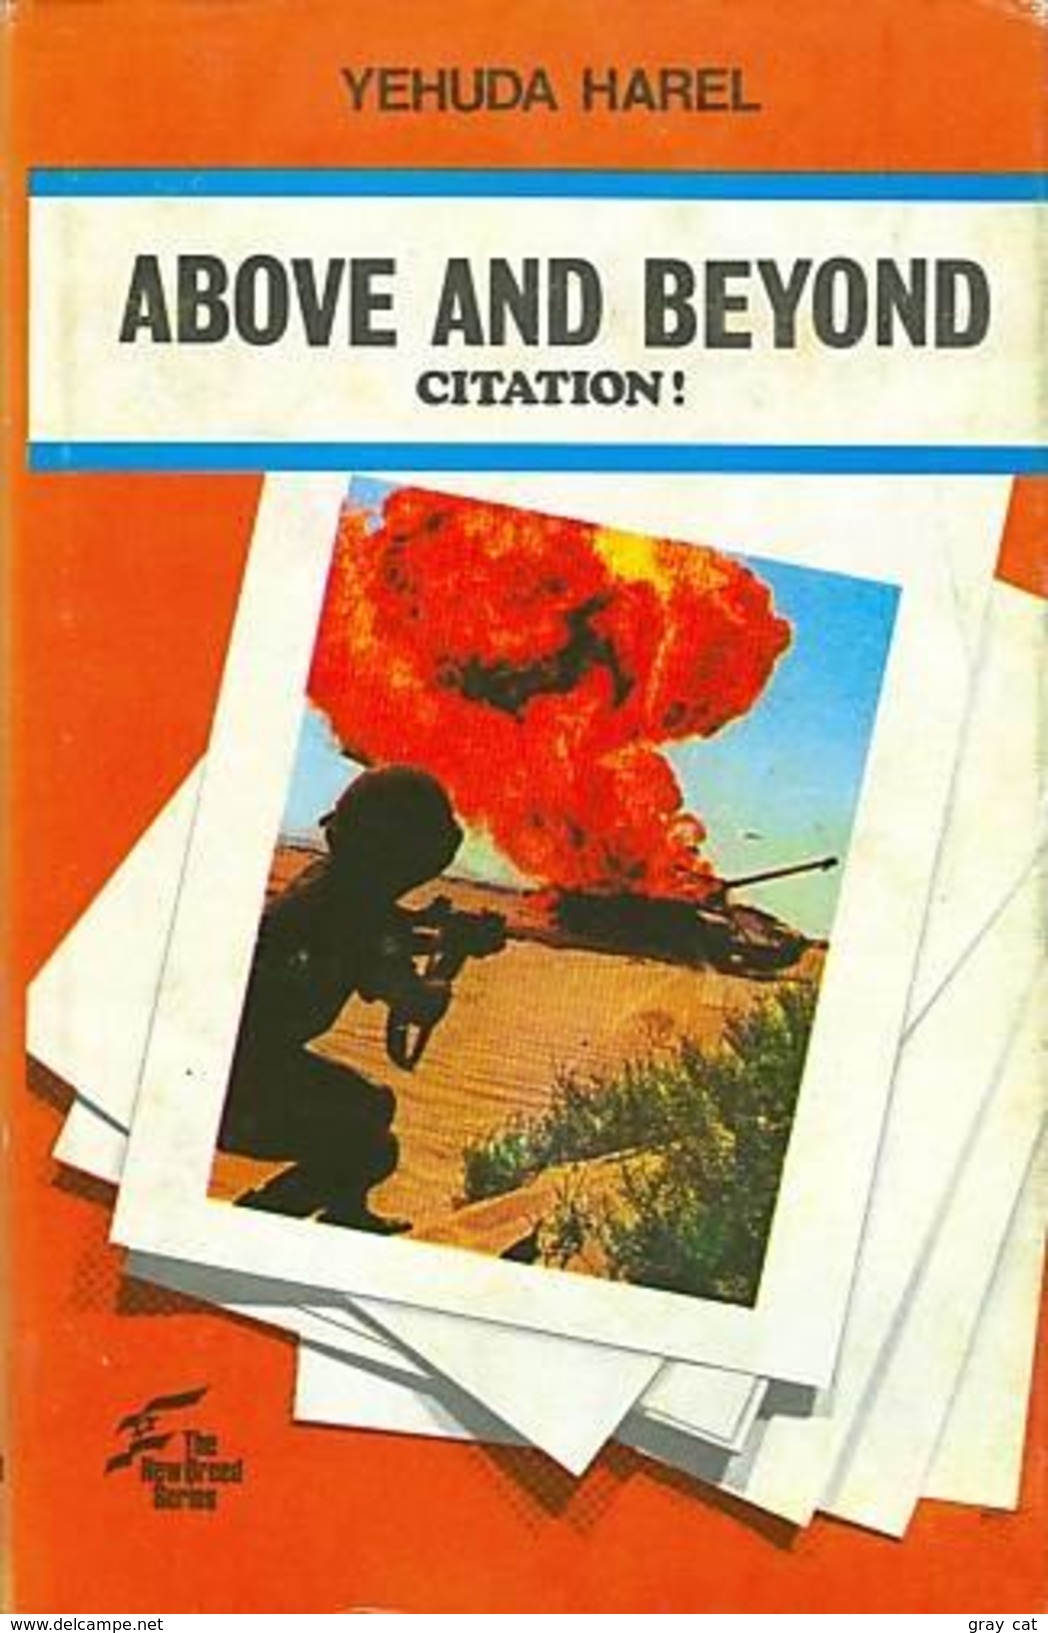 ABOVE AND BEYOND: CITATION ! Heroic Stories Of The Israeli Army By Yehuda Harel - Middle East